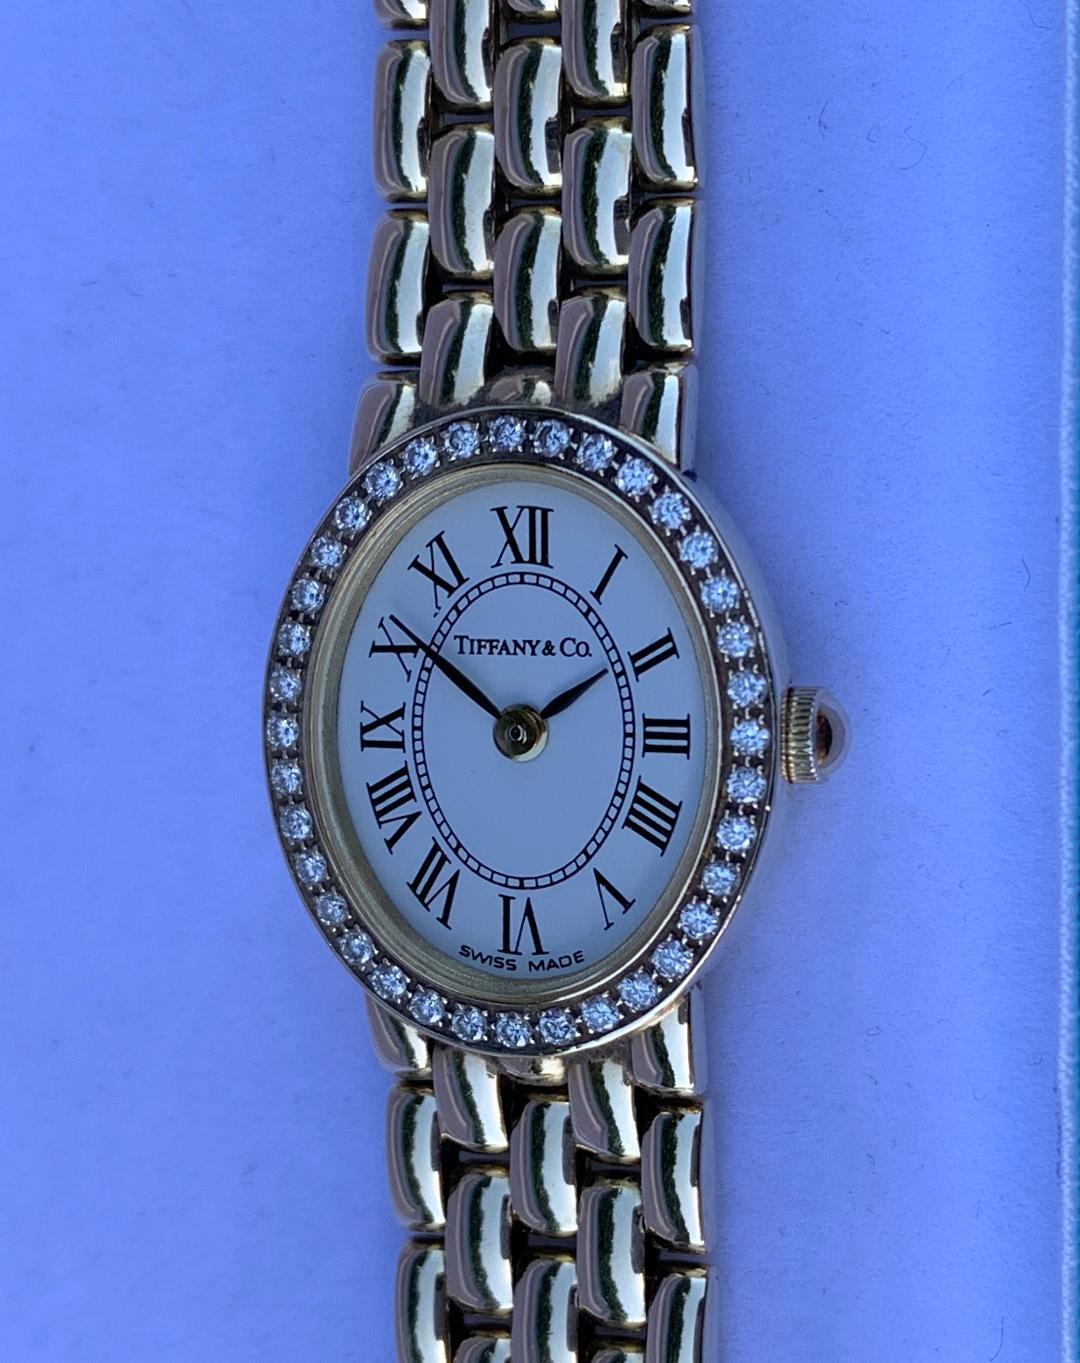 Finest quality designer Tiffany & Company quartz movement oval face ladies wrist watch in 14 karat yellow gold features a beautiful diamond bezel and a 14 karat yellow gold link bracelet. The watch has a solid gold oval case with a small gold crown